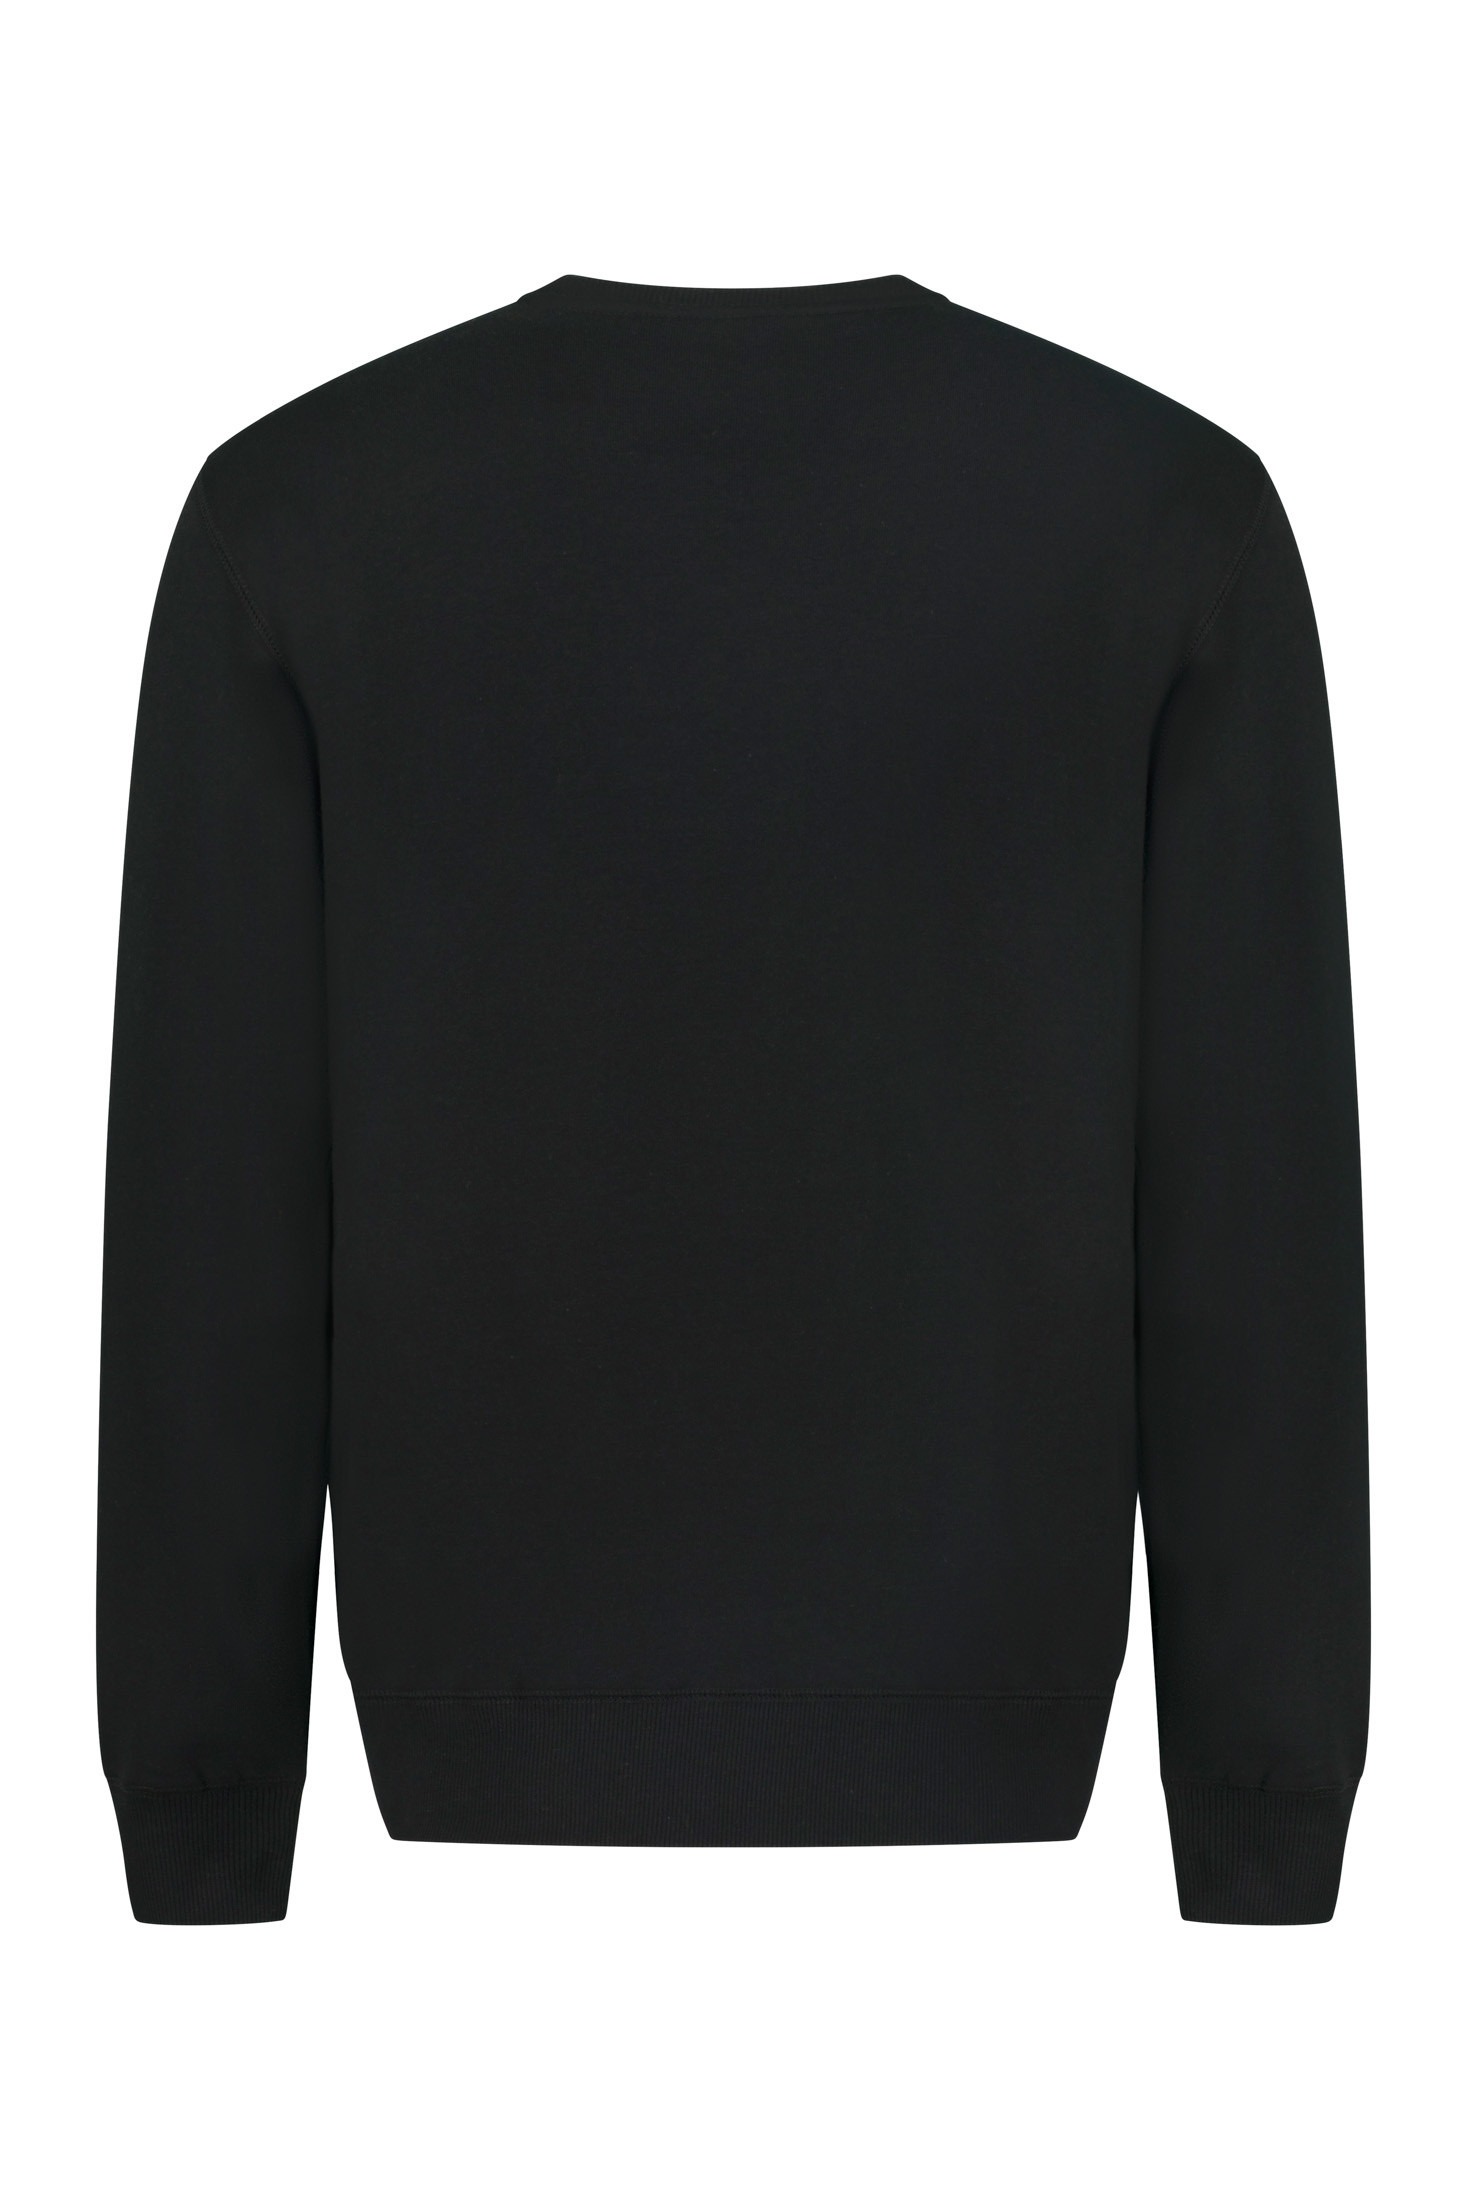 Russell Athletic - Sweatshirt with embroidery, Black, large image number 1